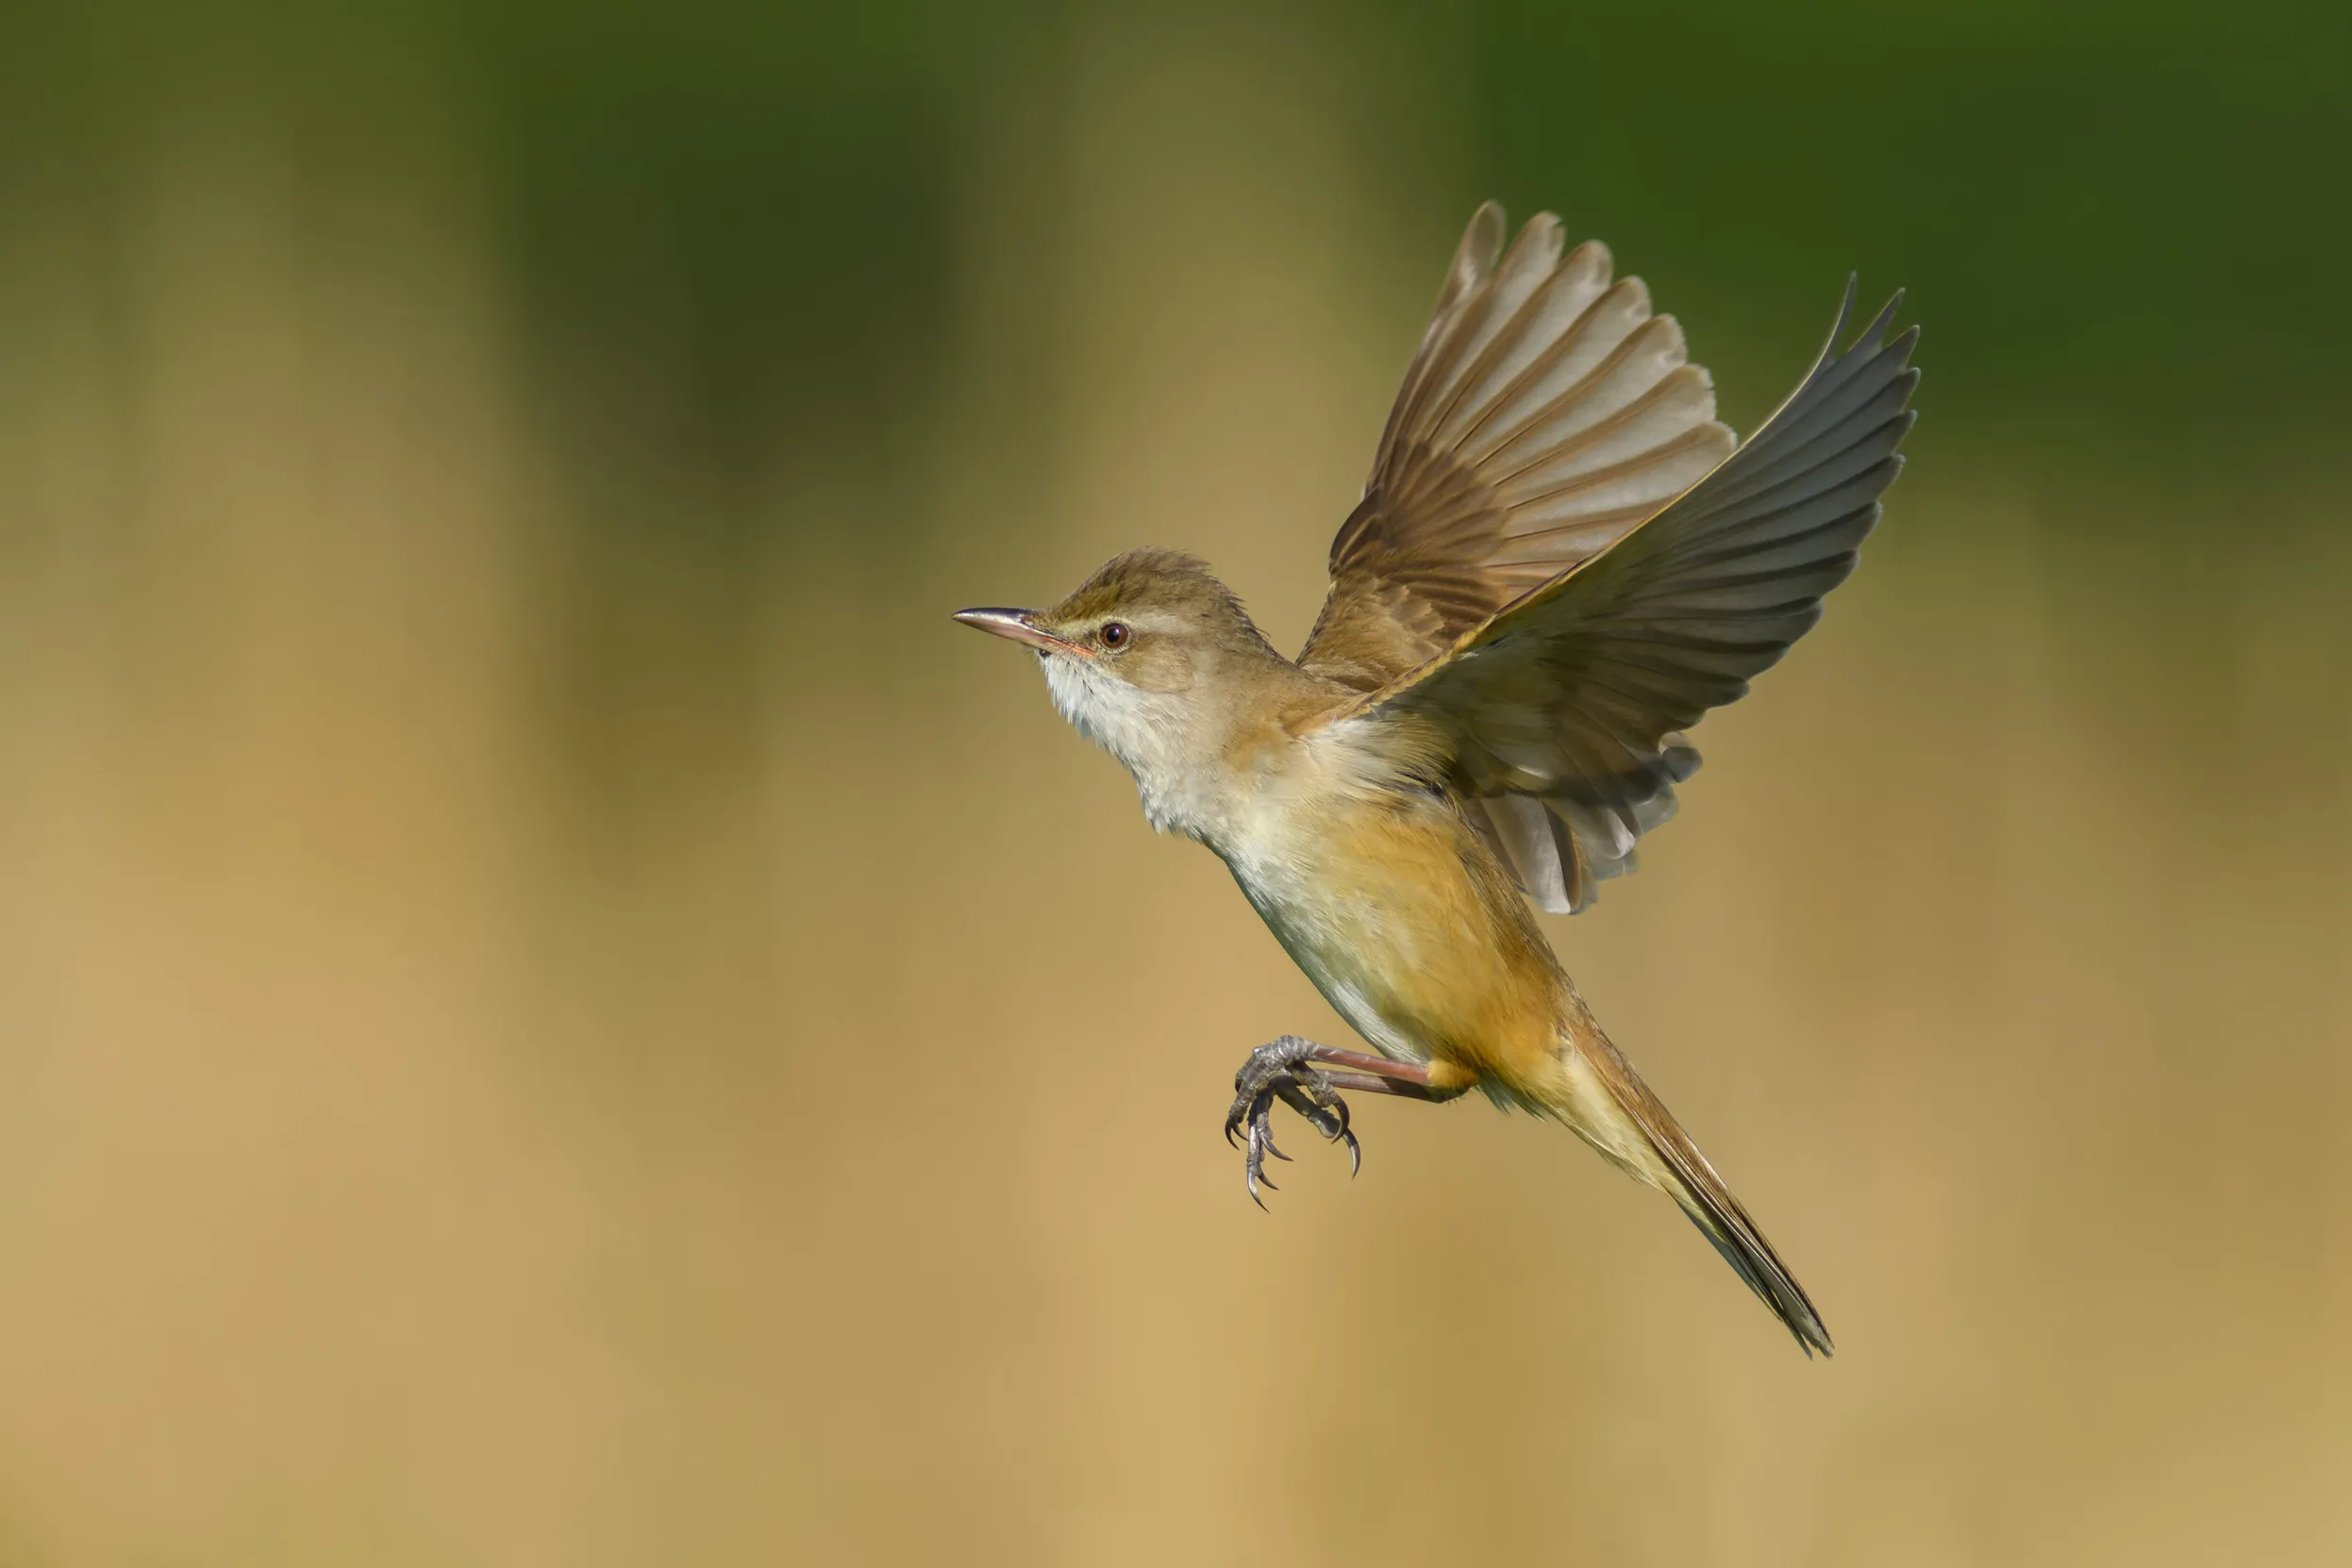 A lone Reed Warbler flying over a reedbed.